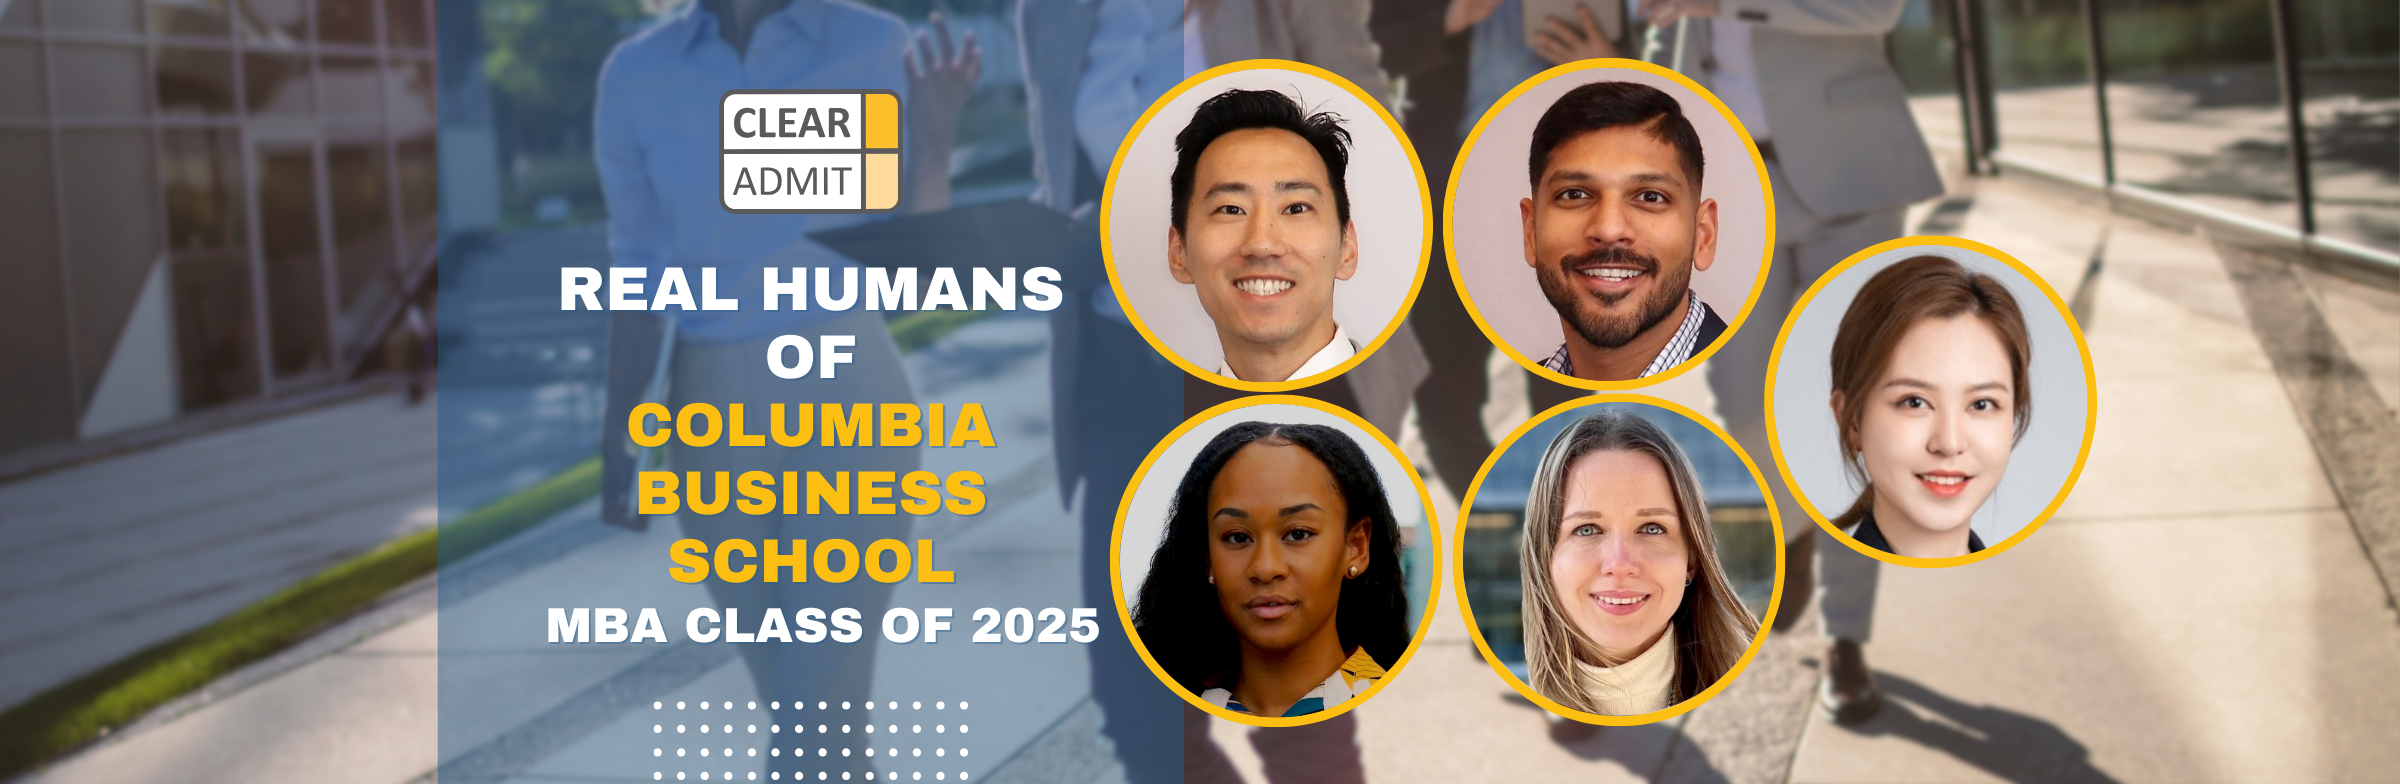 Image for Real Humans of the Columbia Business School MBA Class of 2025